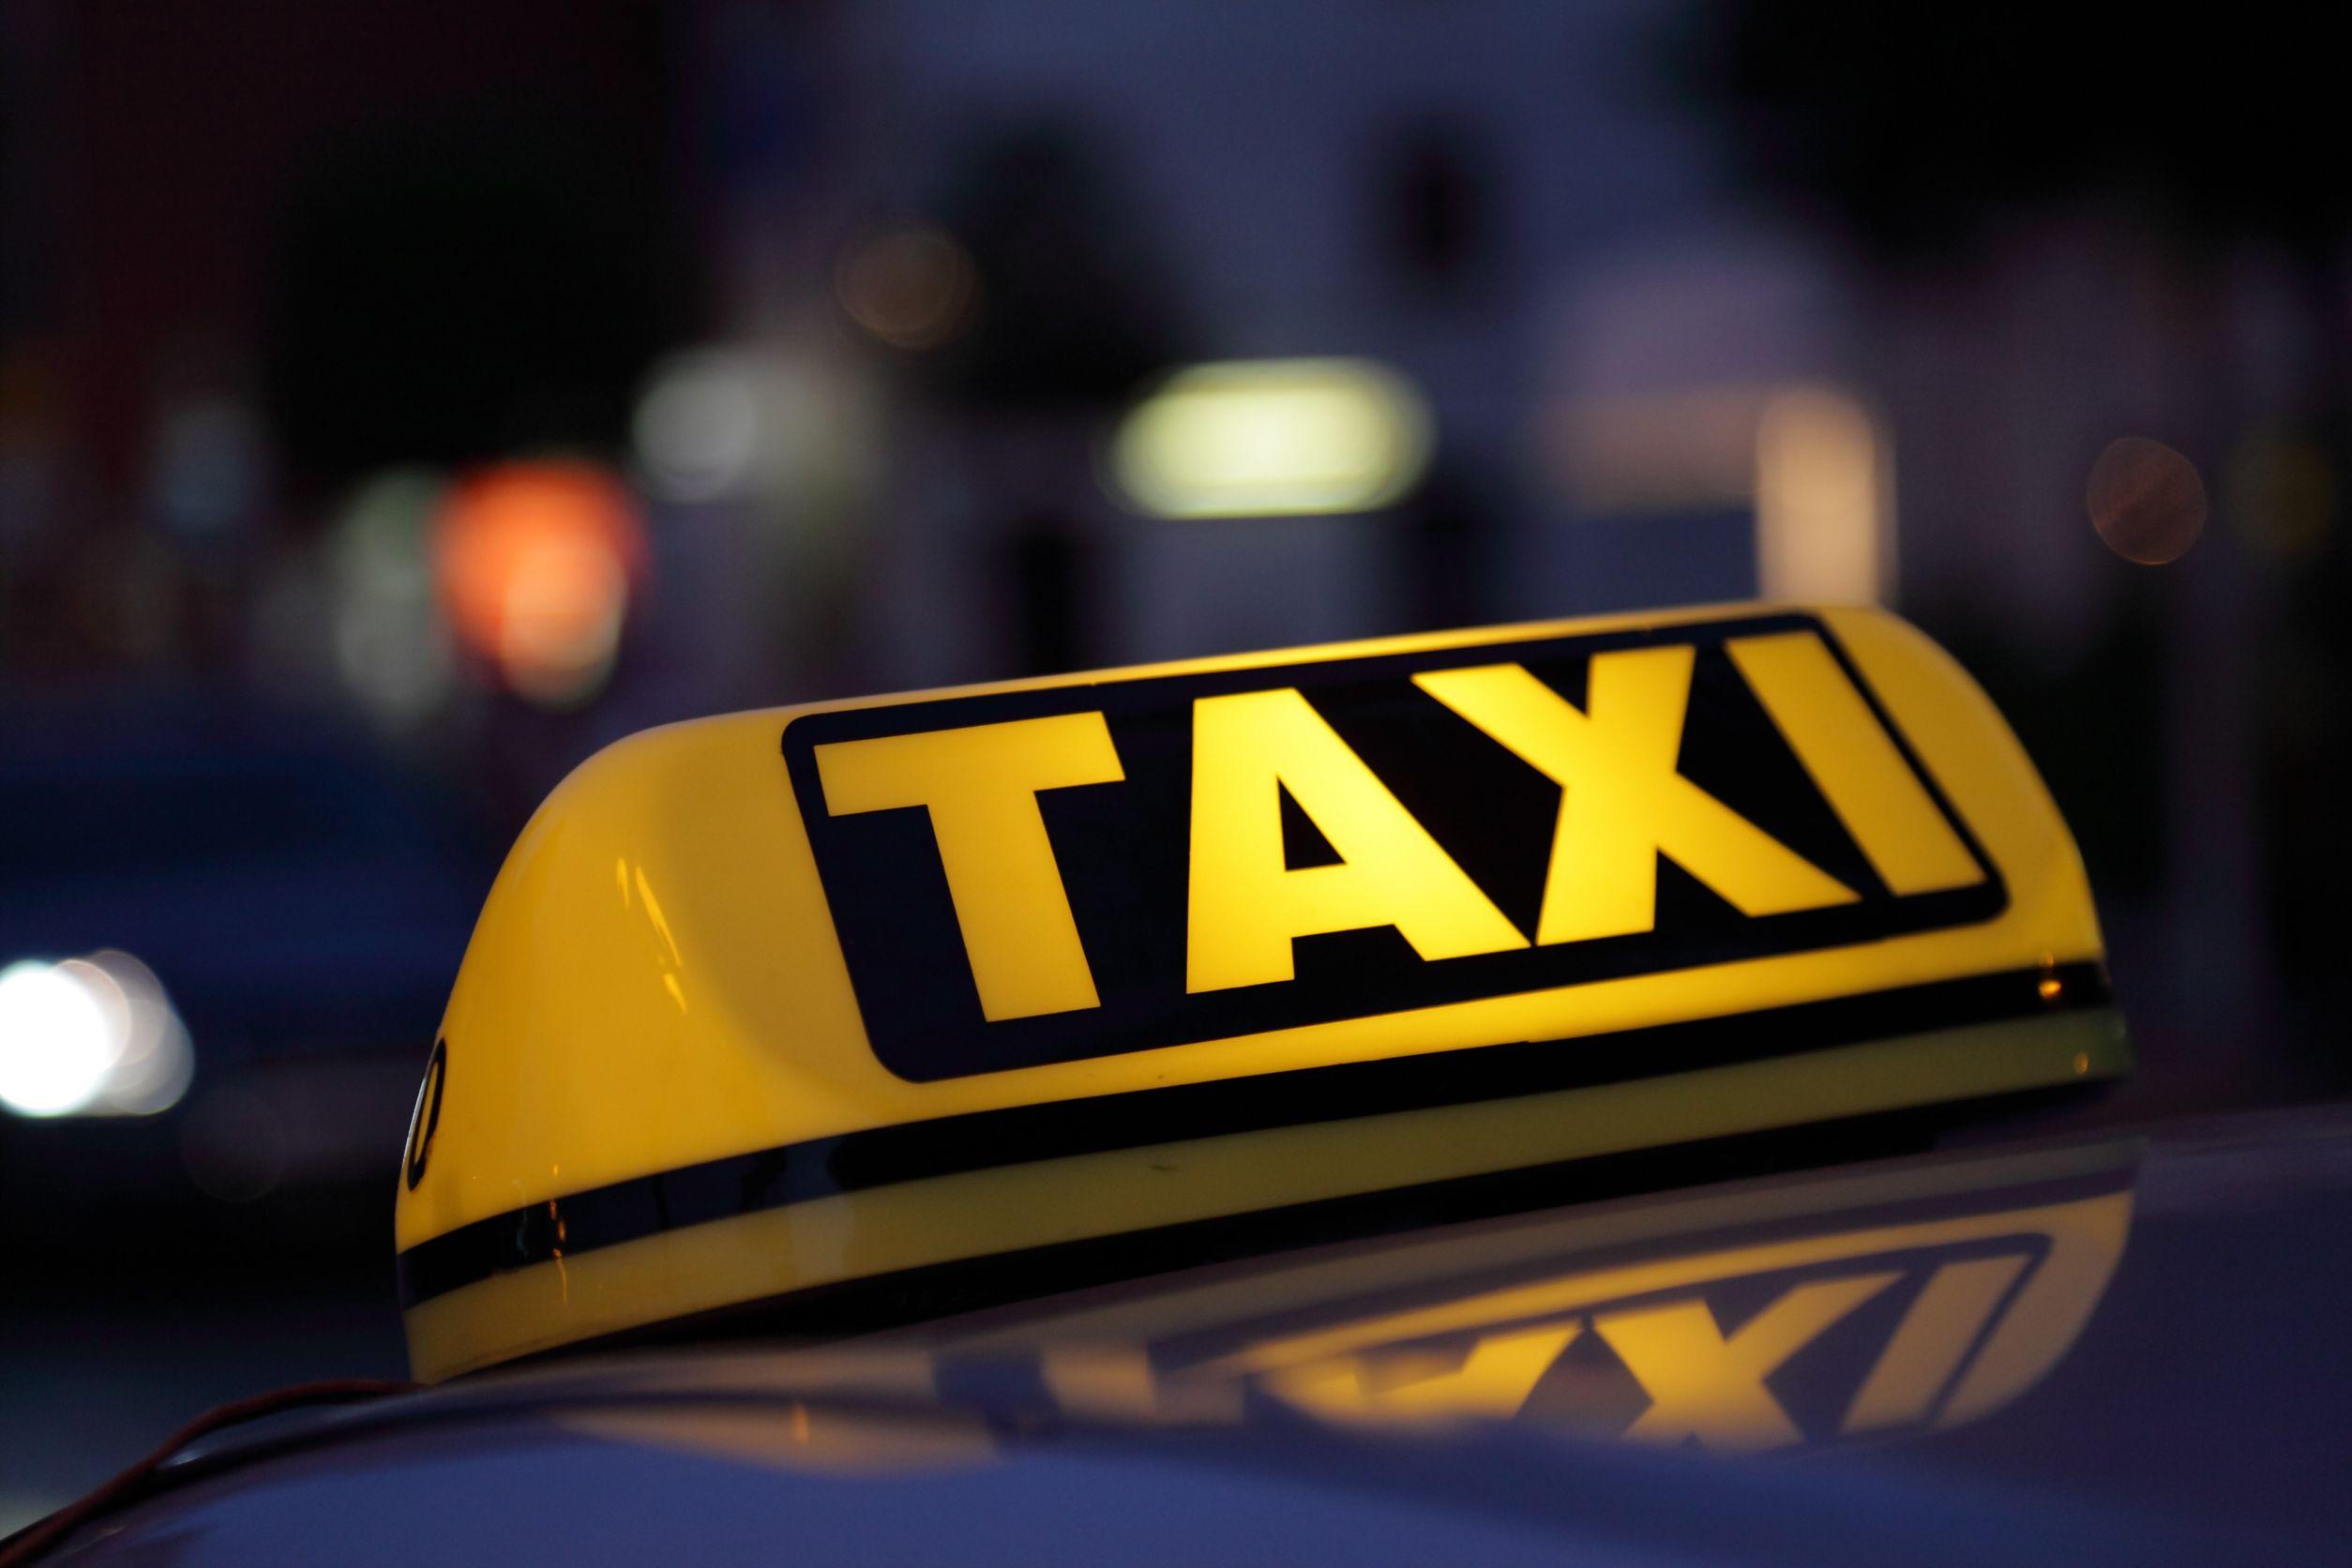 HD Taxi Wallpaper and Photo. HD Misc Wallpaper